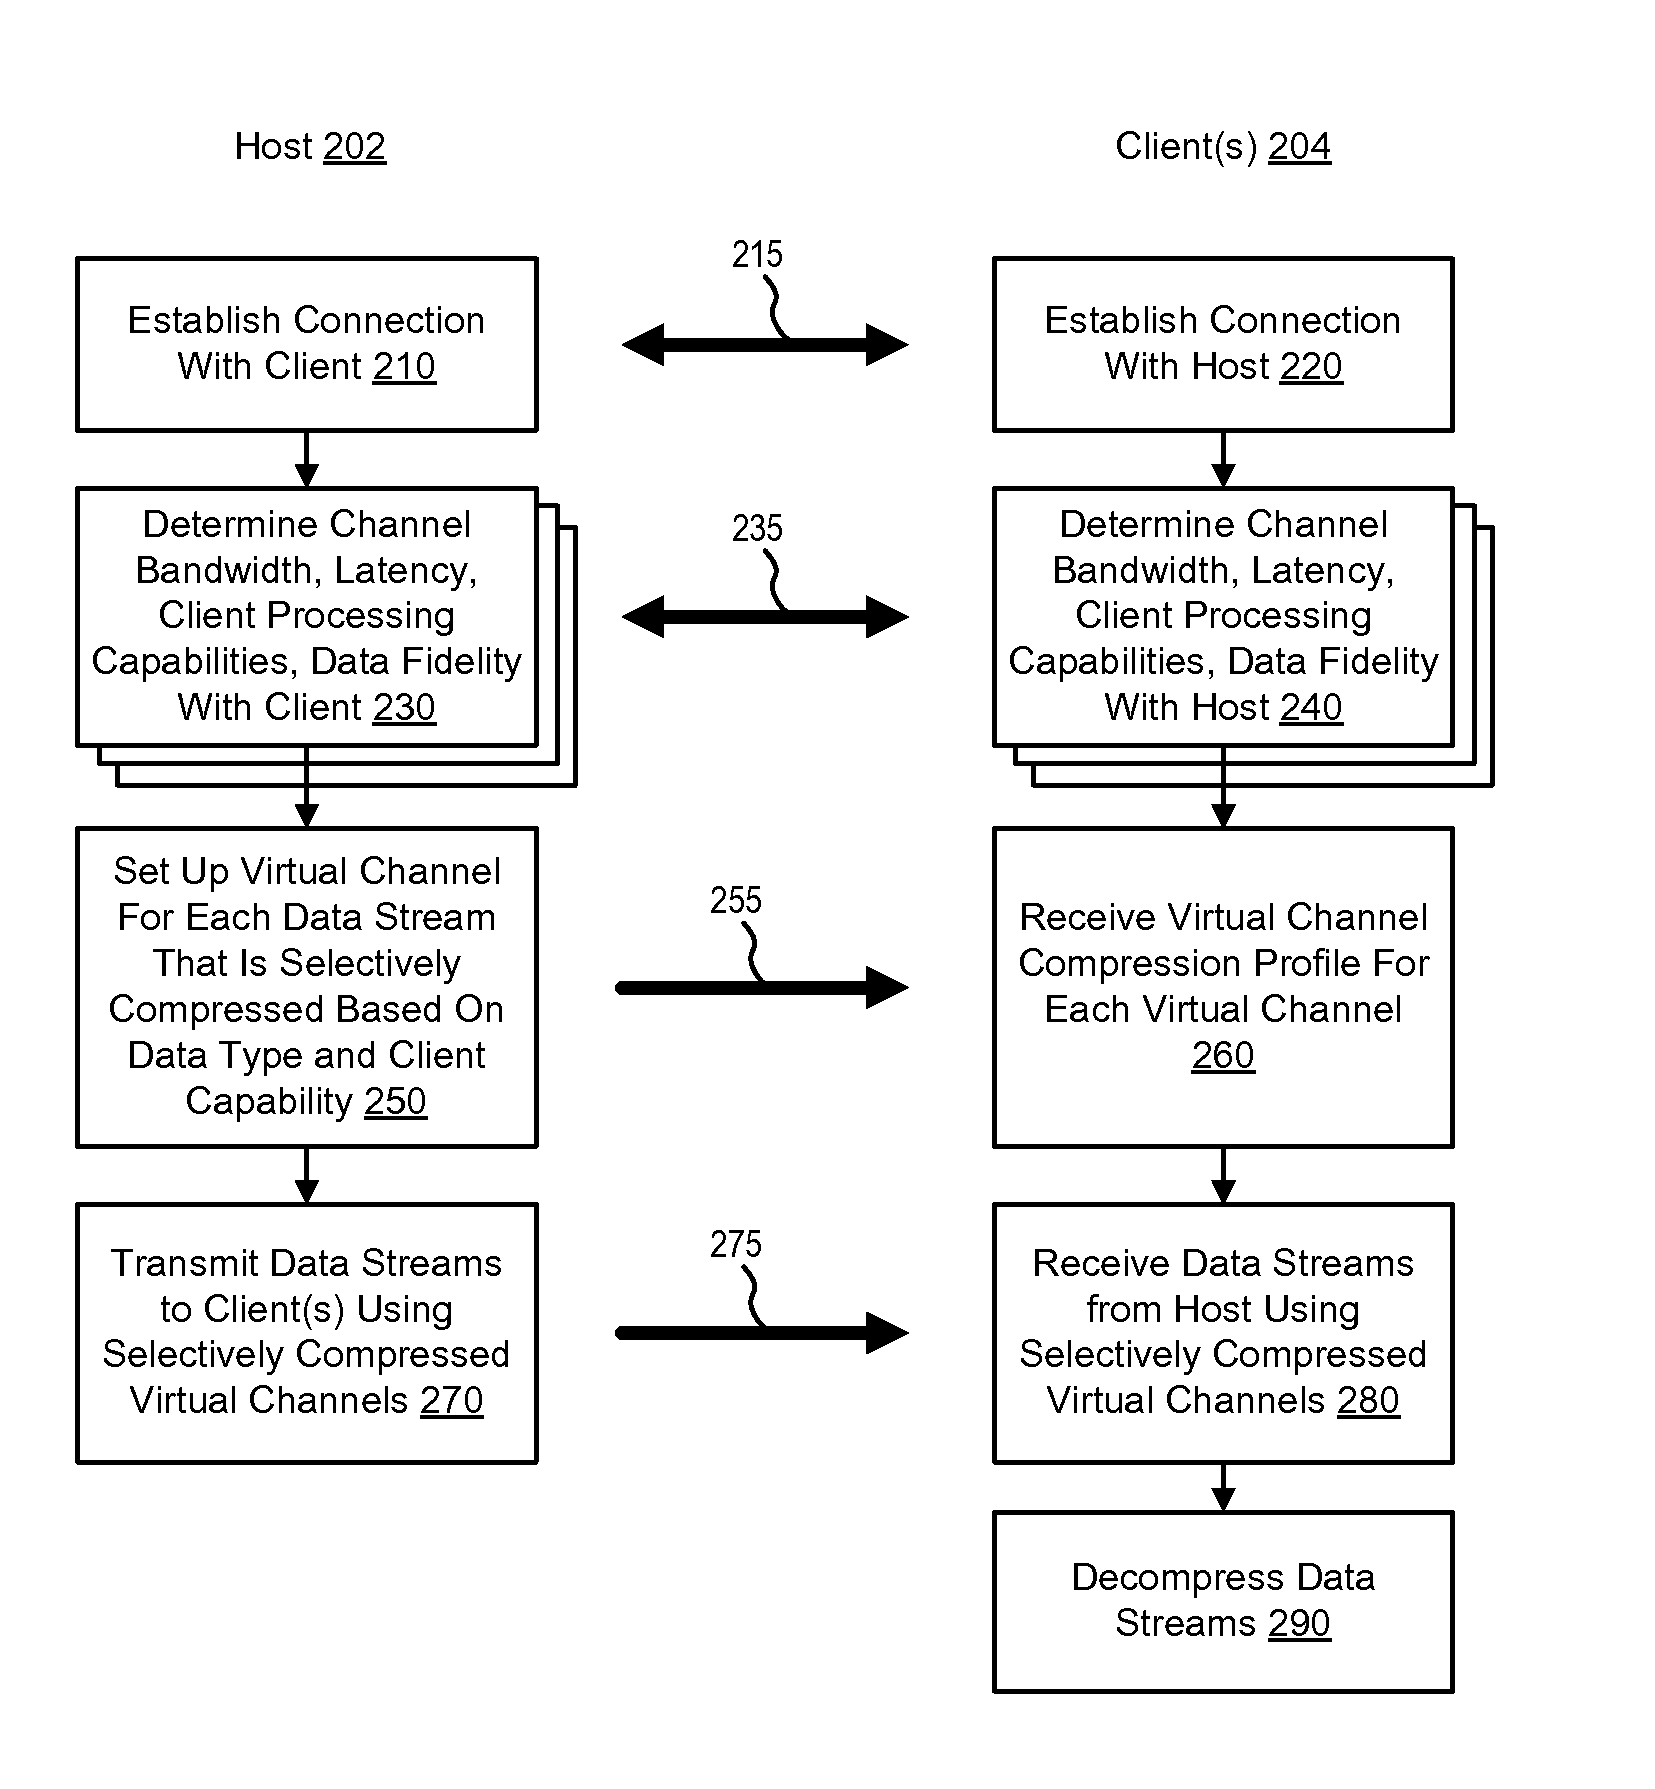 Selective Compression Based on Data Type and Client Capability